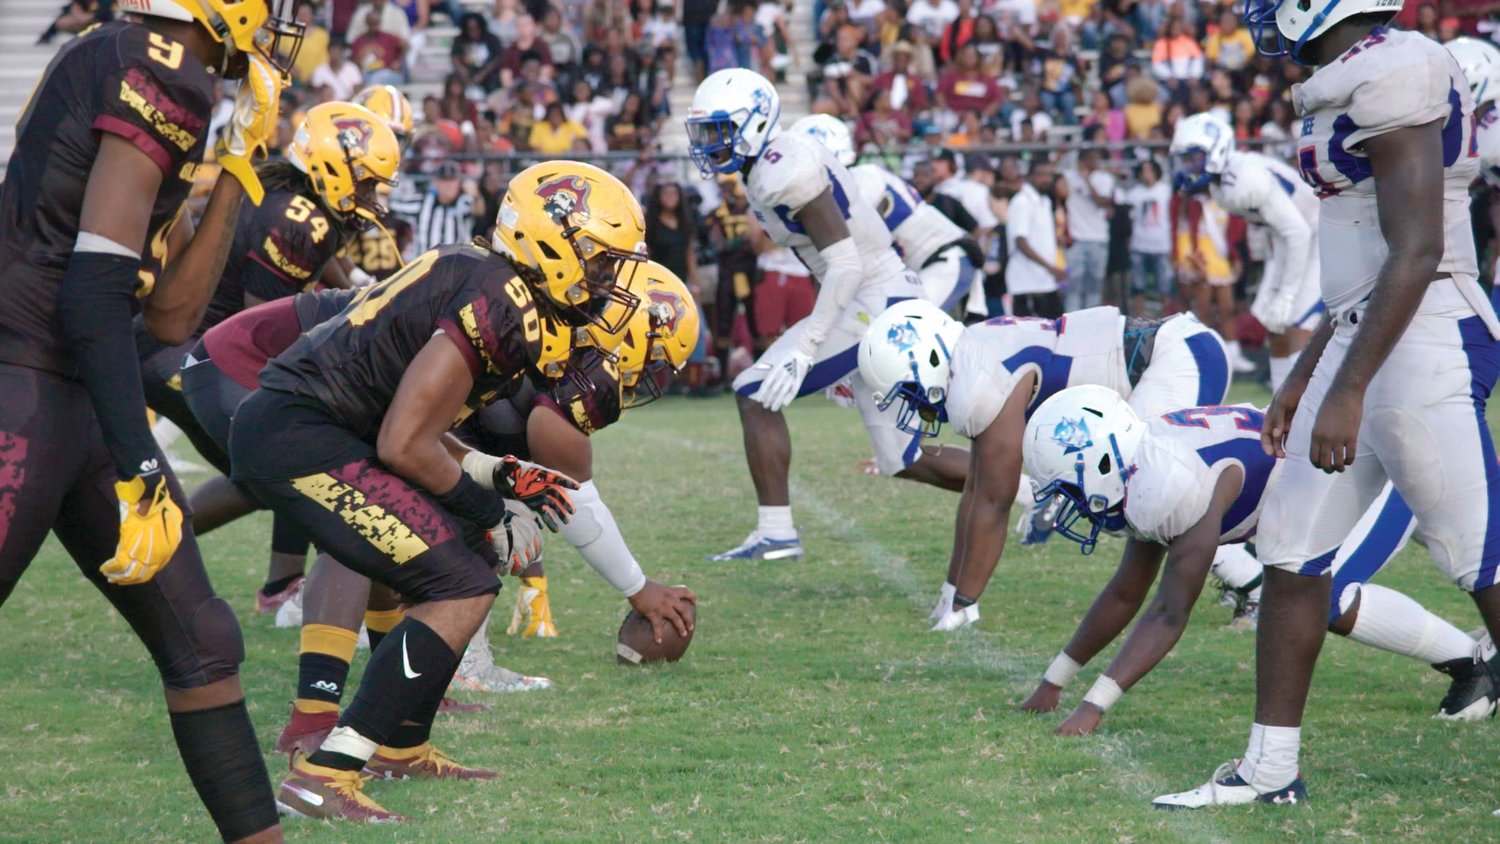 The Pahokee defense and Glades Central offense face off in the 2019 Muck Bowl.